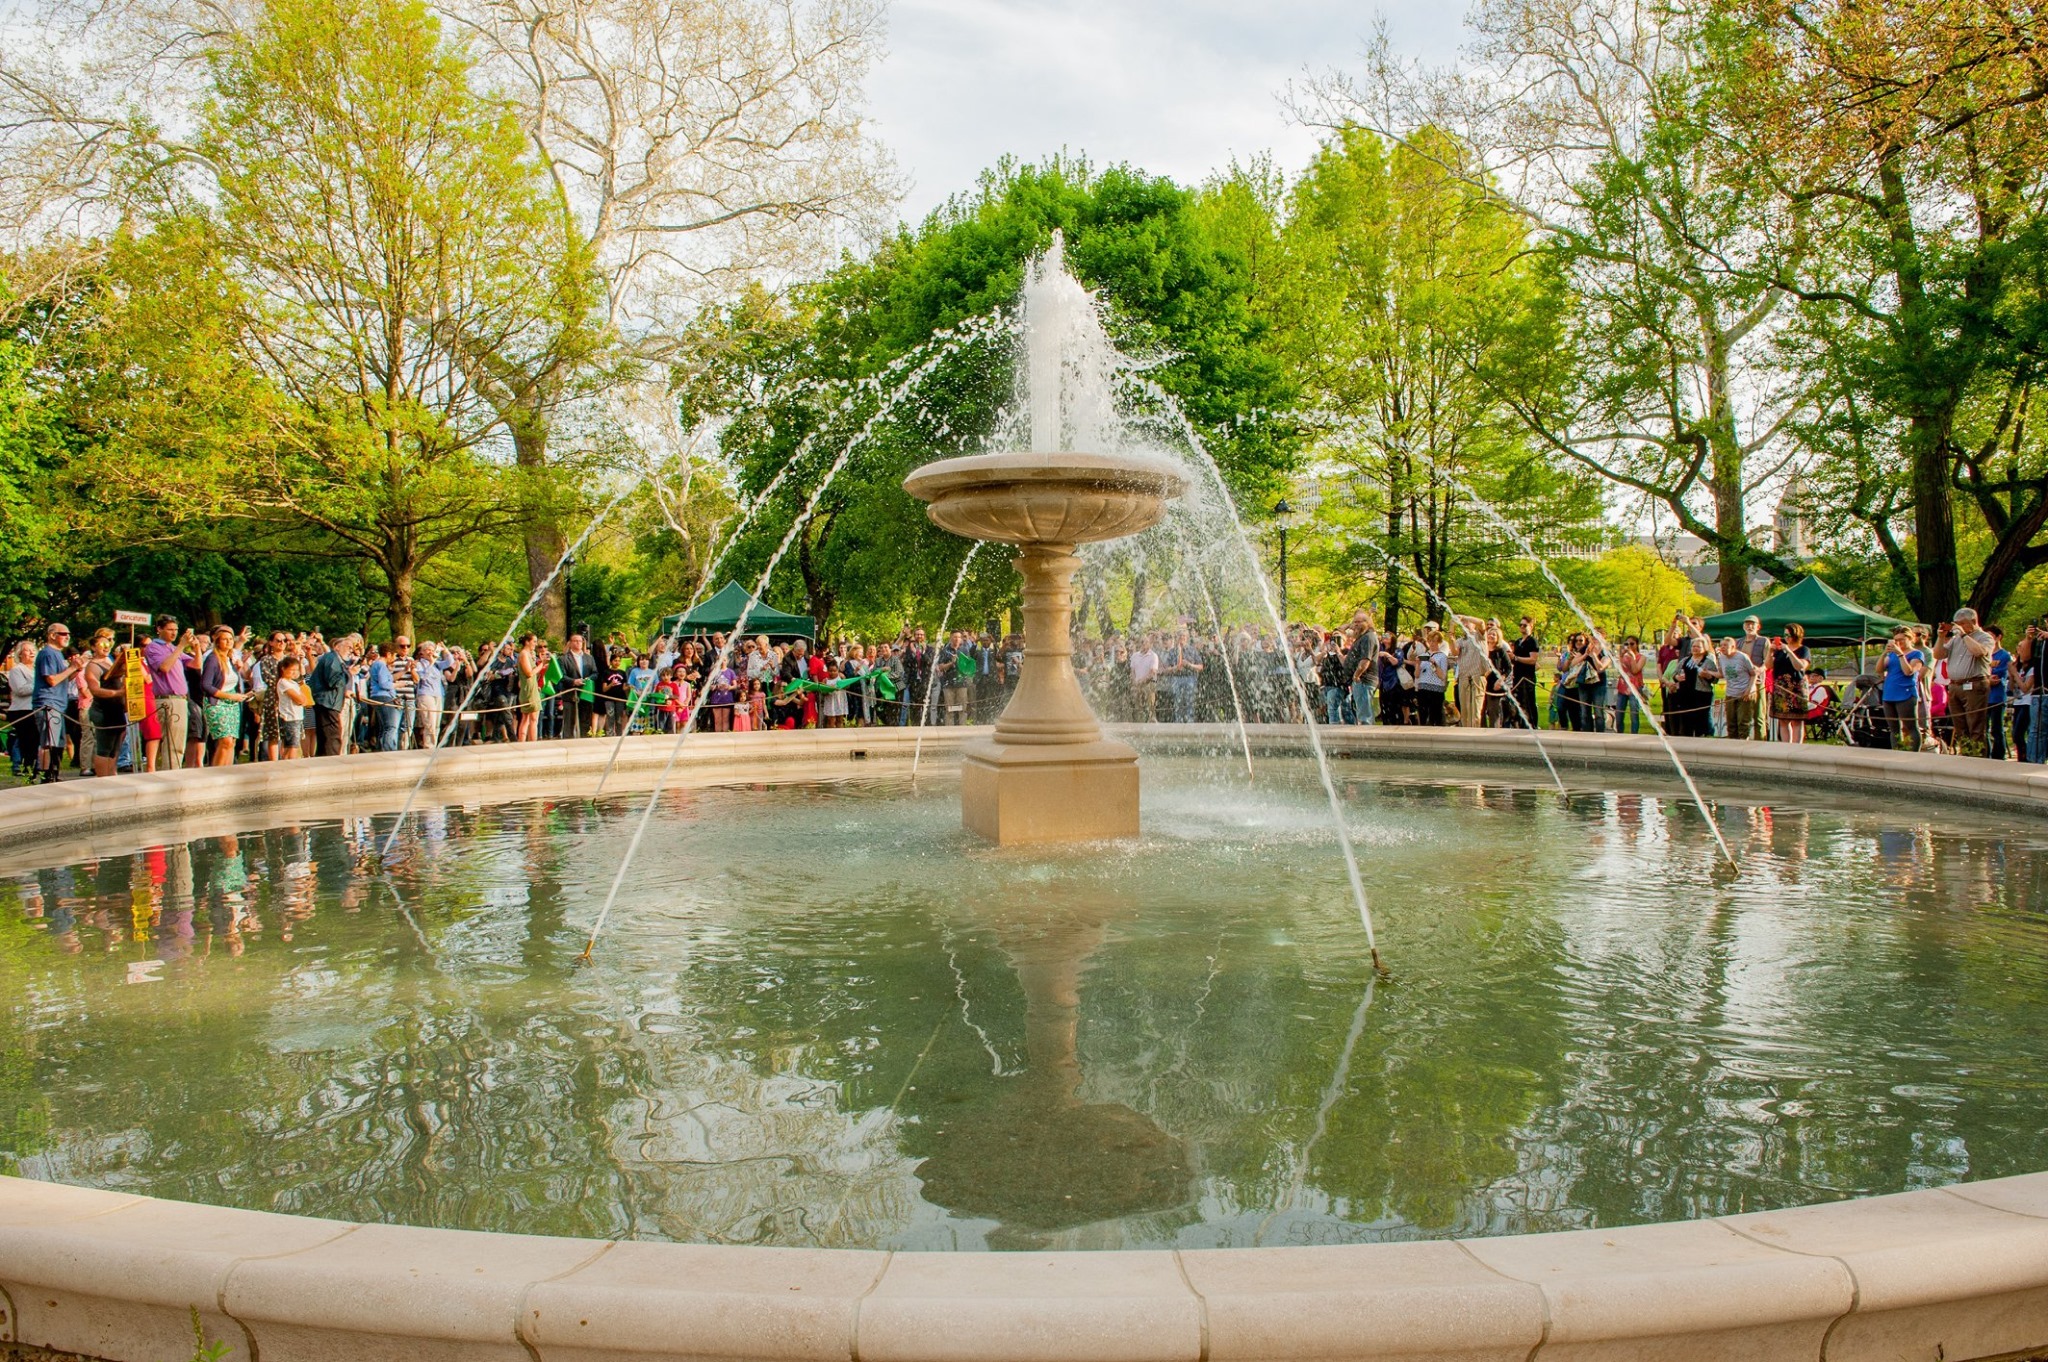 The grand opening of the new Patricia Rooney Memorial Fountain.